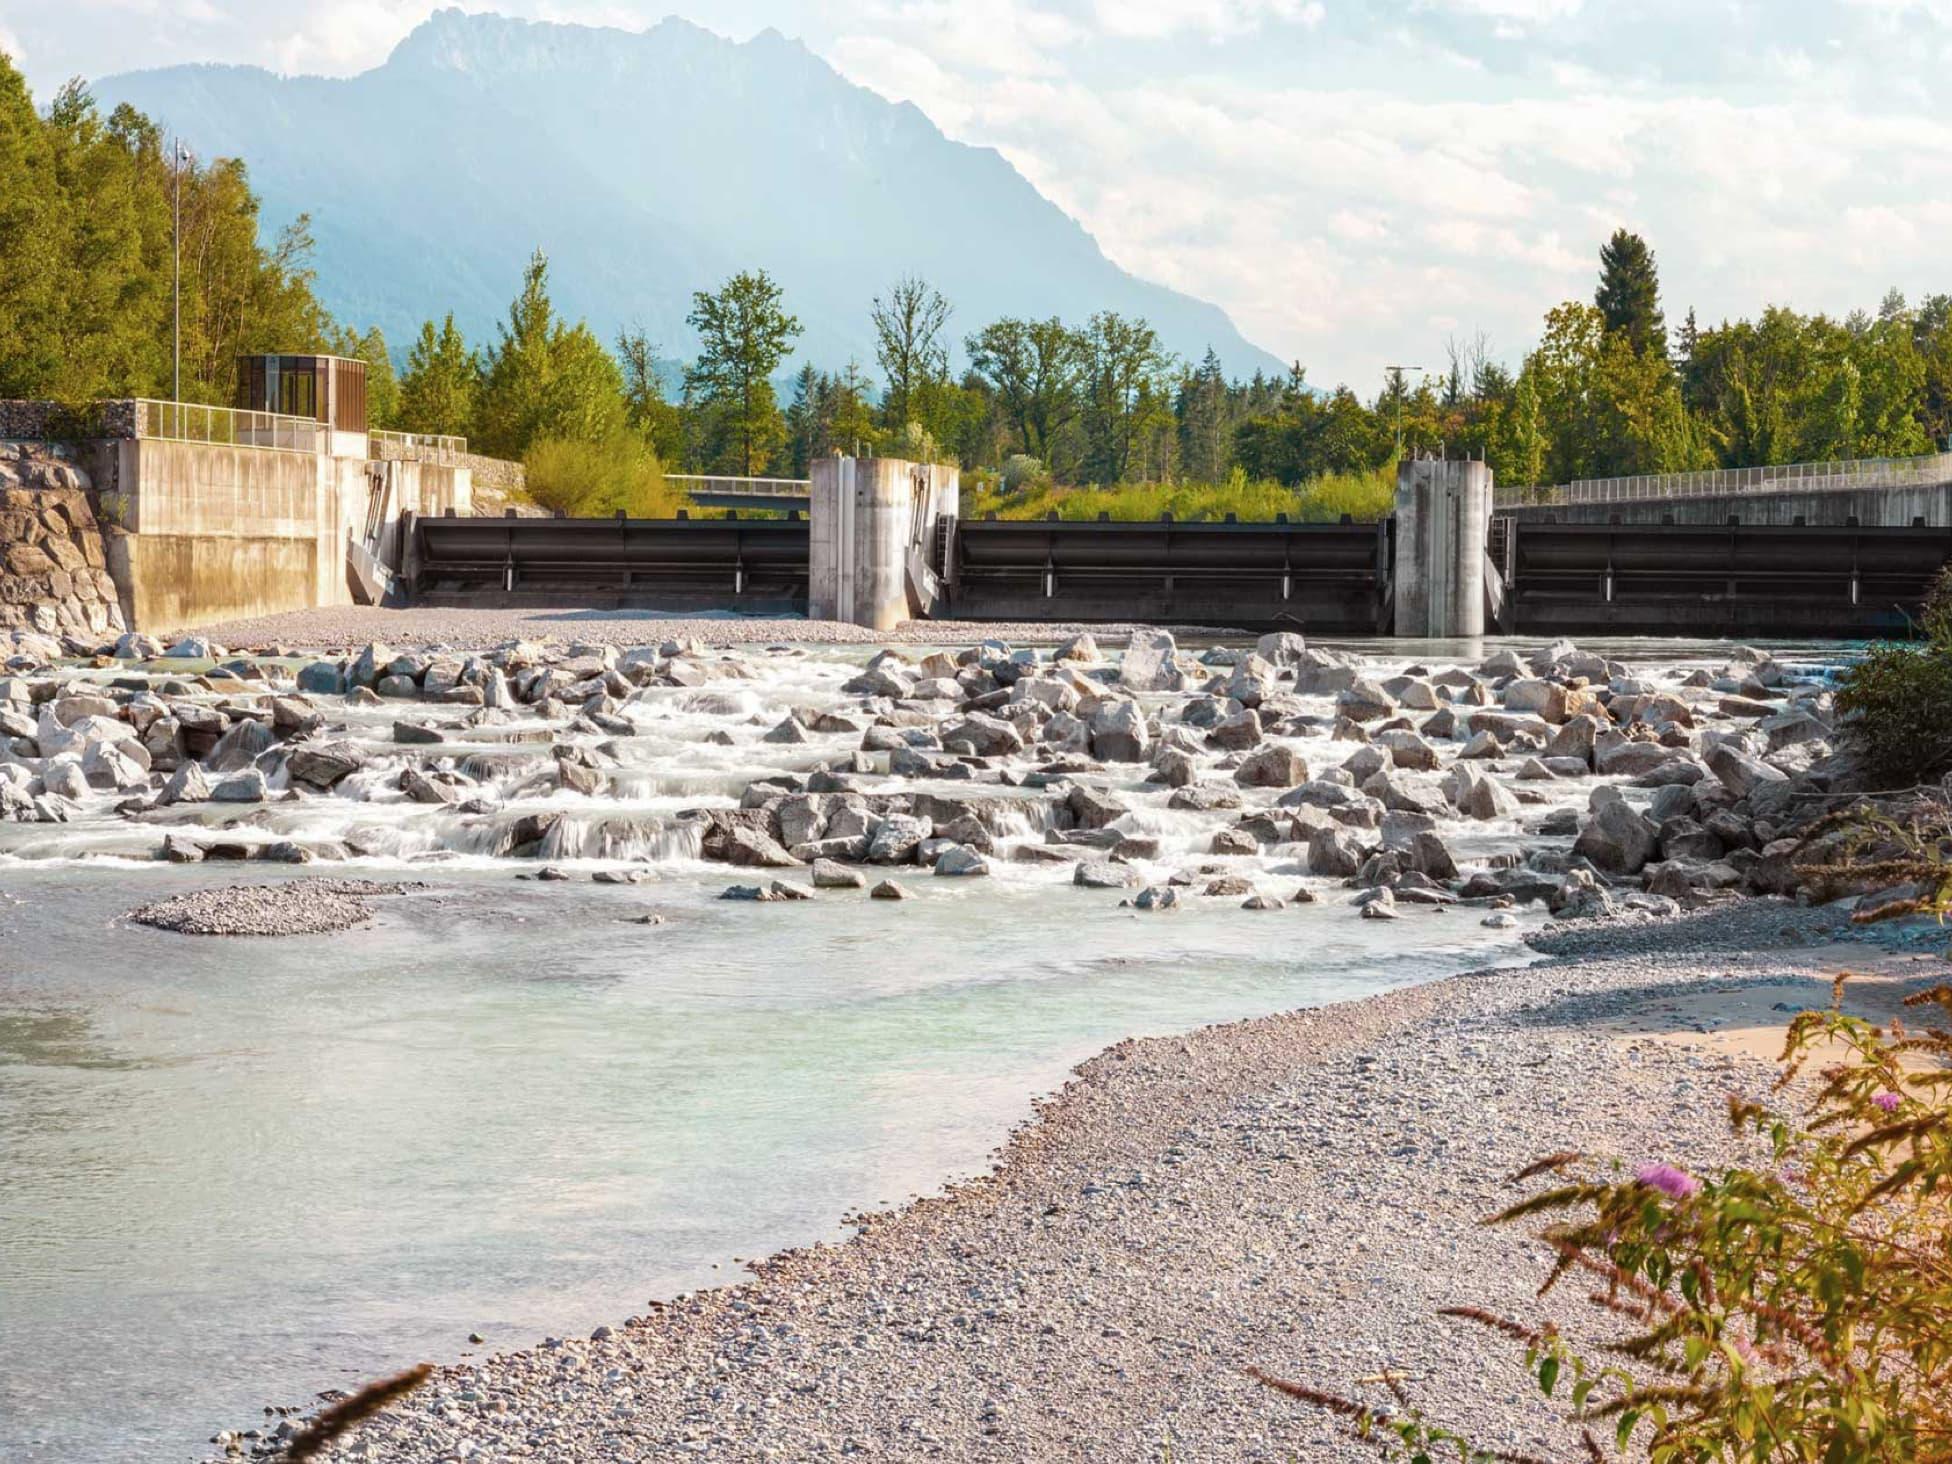 A hydroelectric power plant to generate environmentally-friendly electricity.